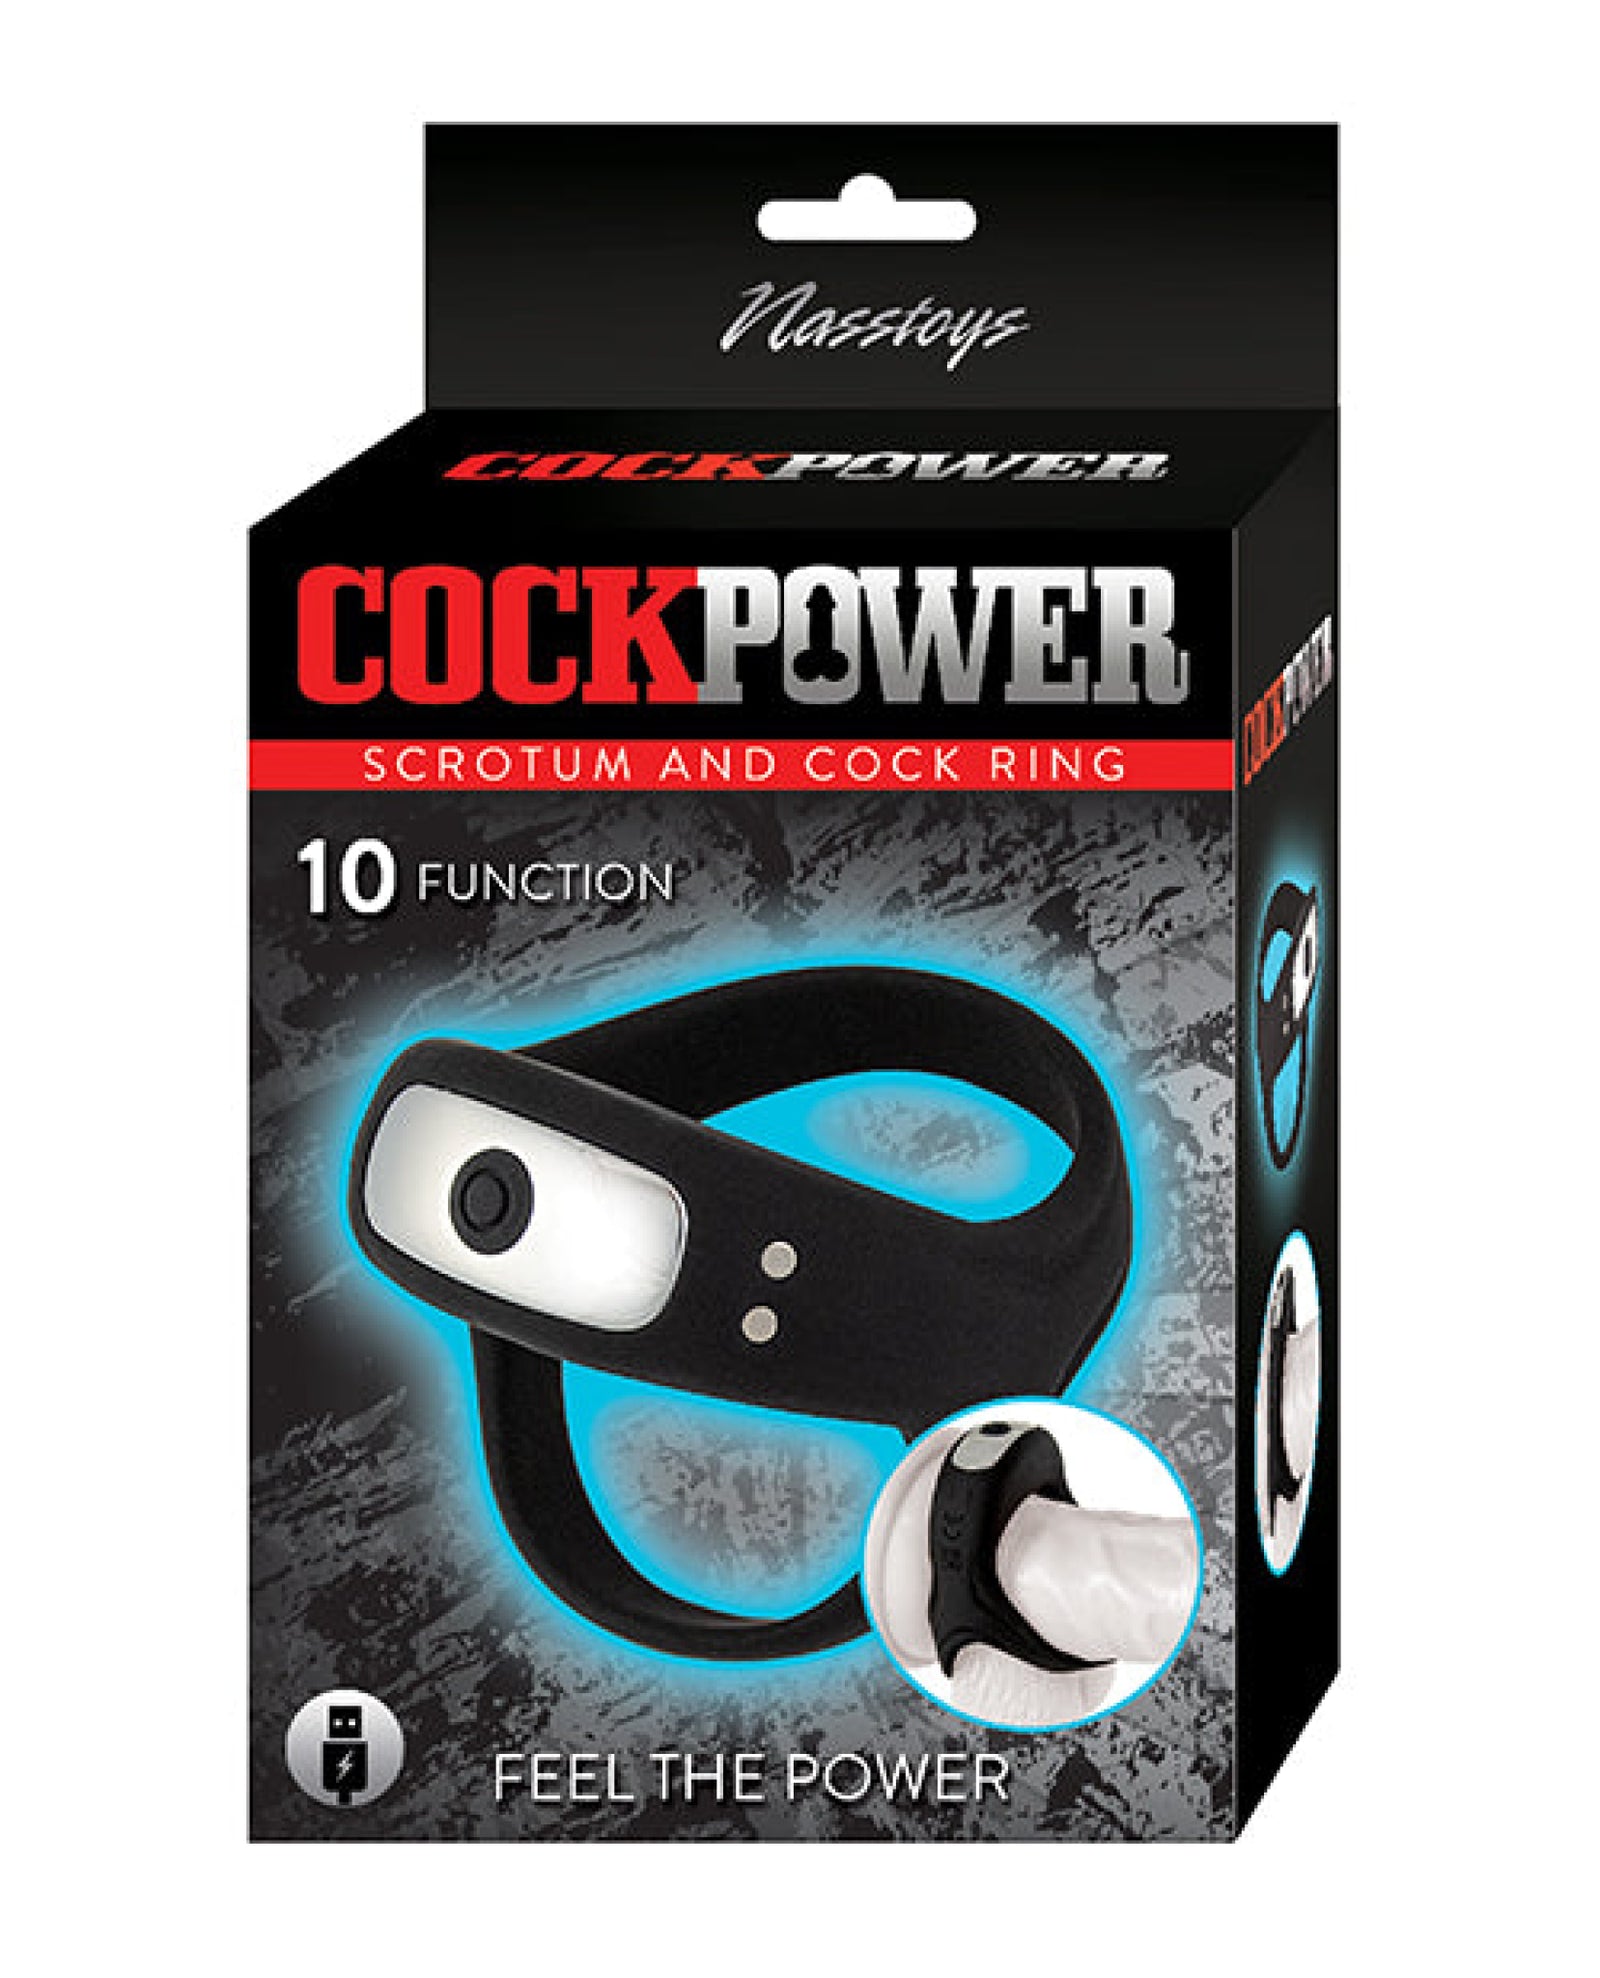 Cockpower Scrotum and Cock Ring - Black Nasstoys